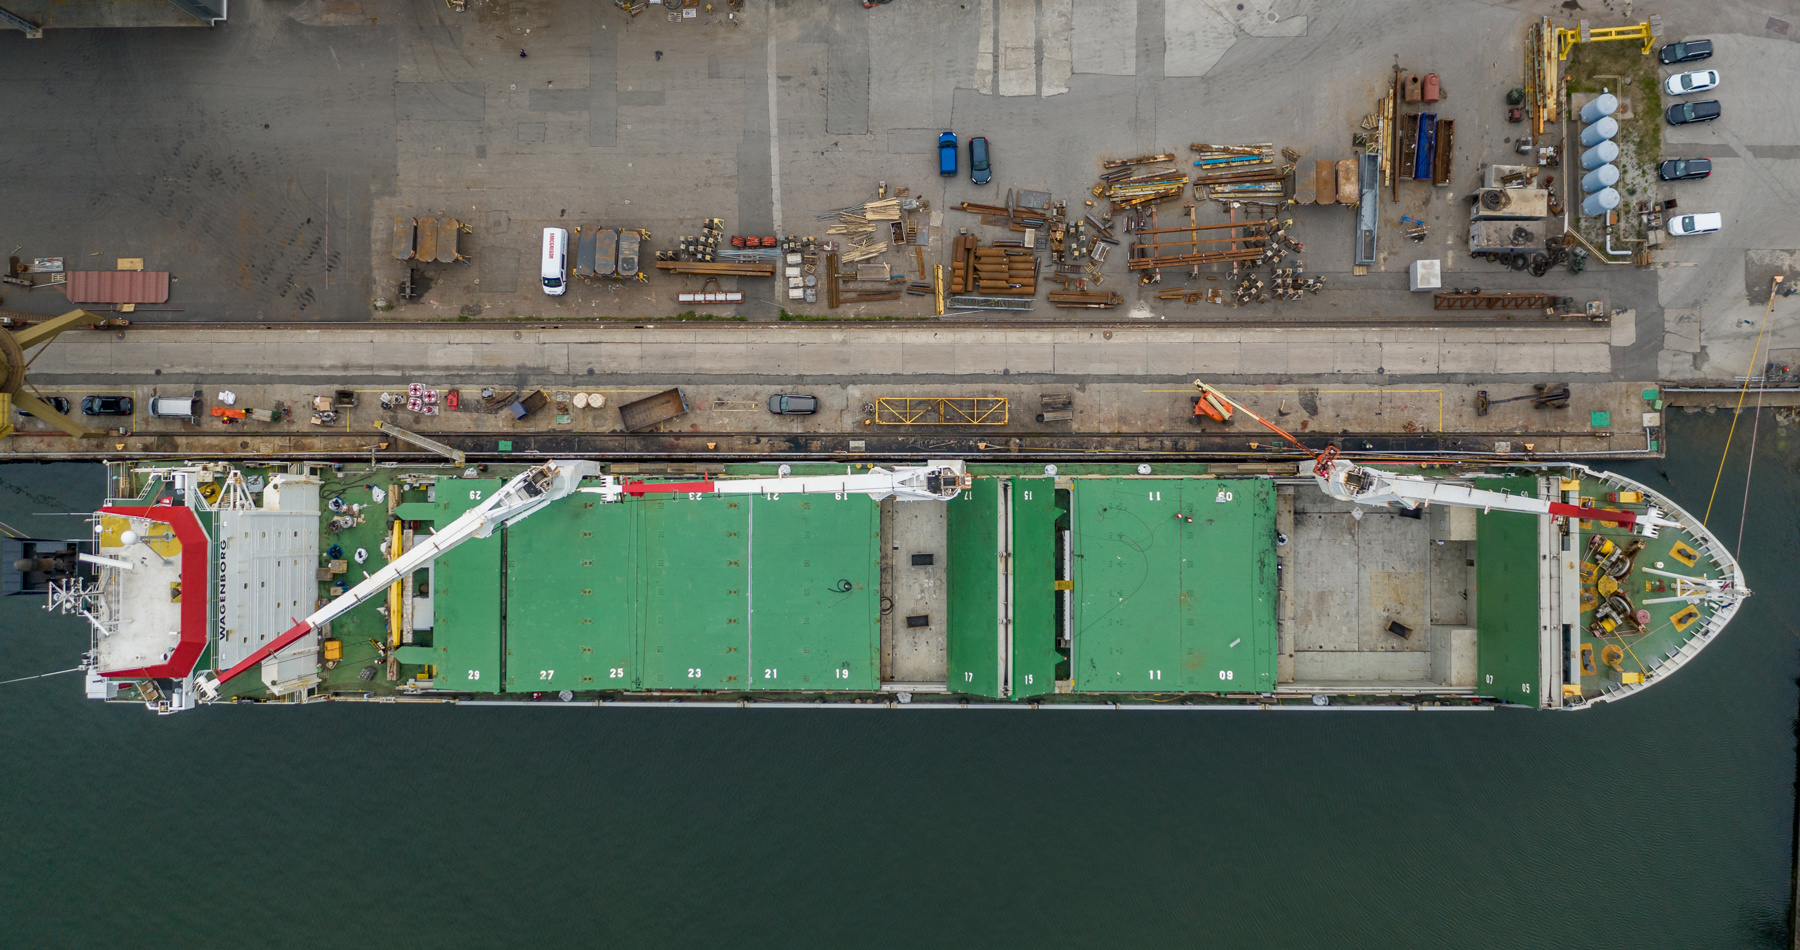 In 2020 Wagenborg installed 33 ballast water management systems